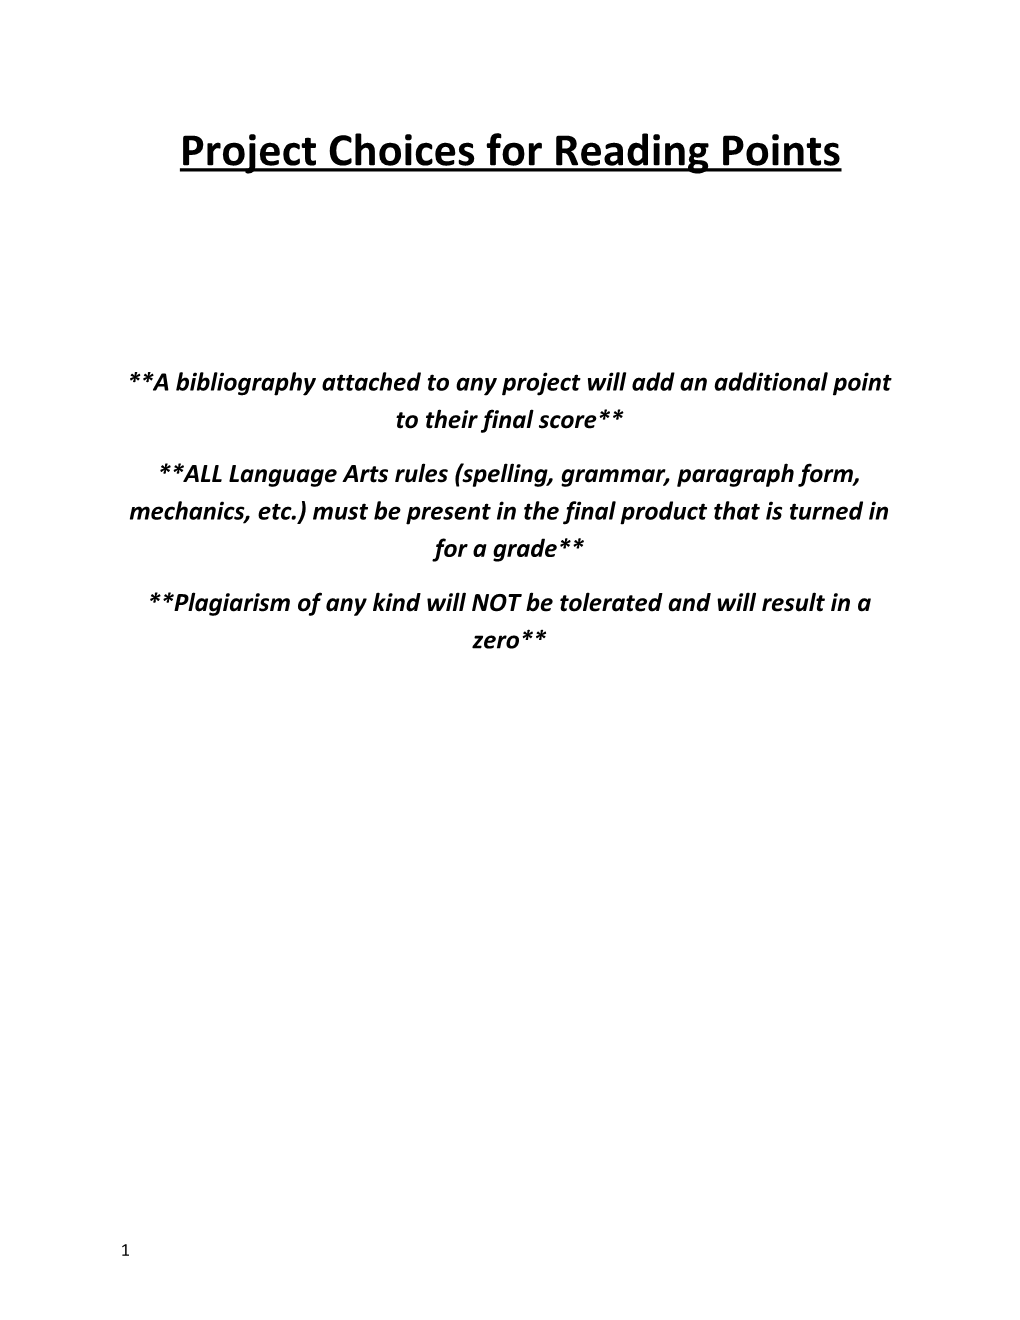 Project Choices for Reading Points